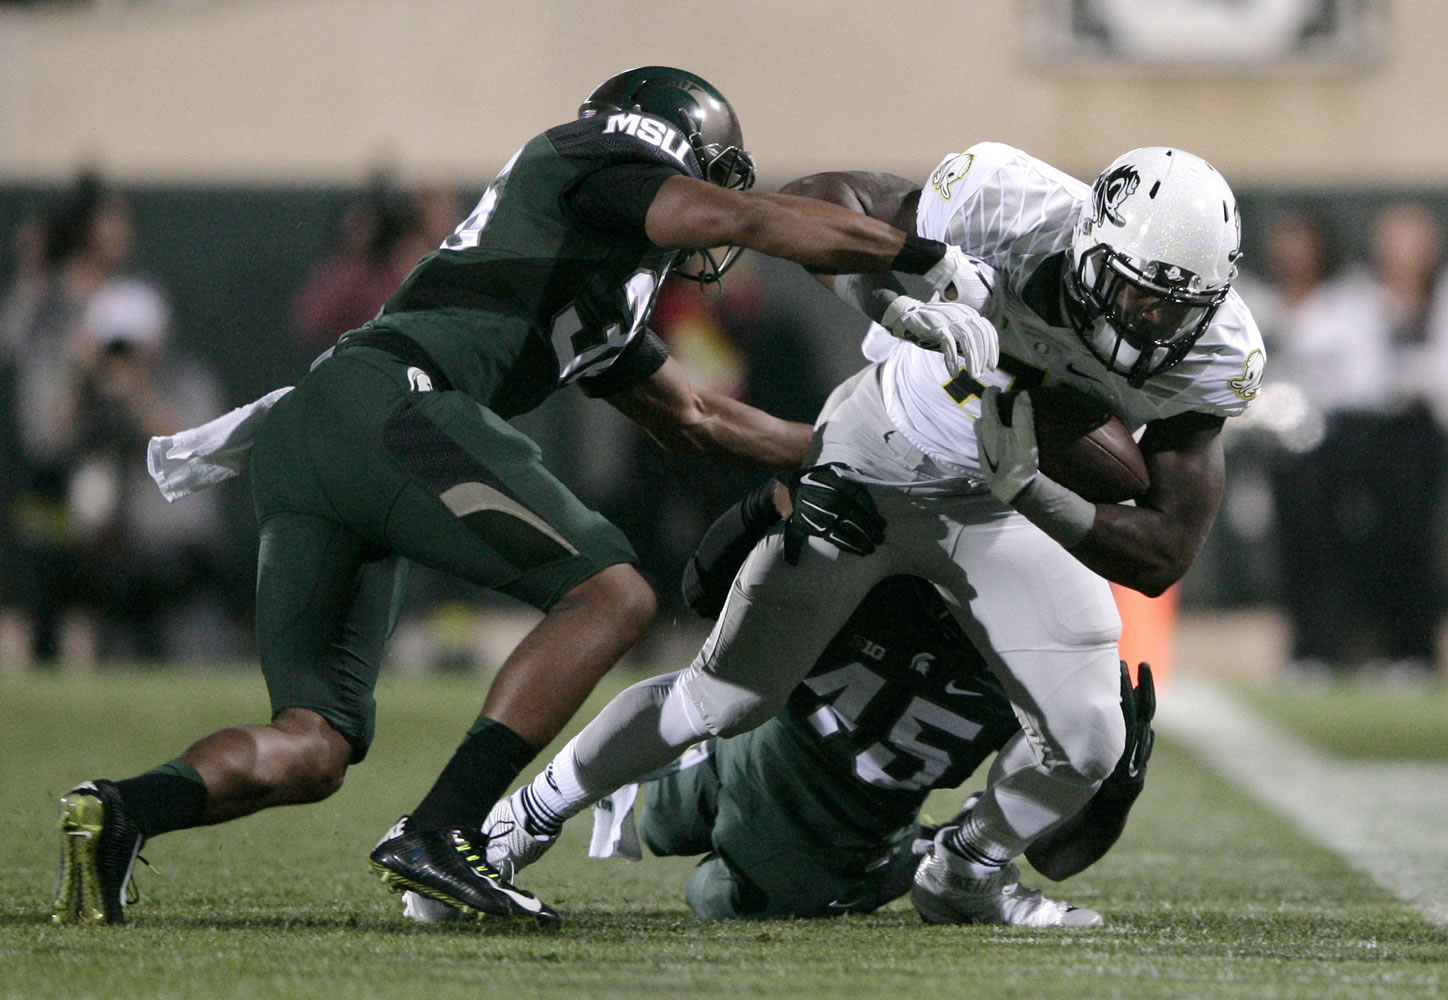 Oregon's Royce Freeman, right, is tackled by Michigan State's Darien Harris (45) and Arjen Colquhoun, left, during the first quarter of an NCAA college football game, Saturday, Sept. 12, 2015, in East Lansing, Mich.